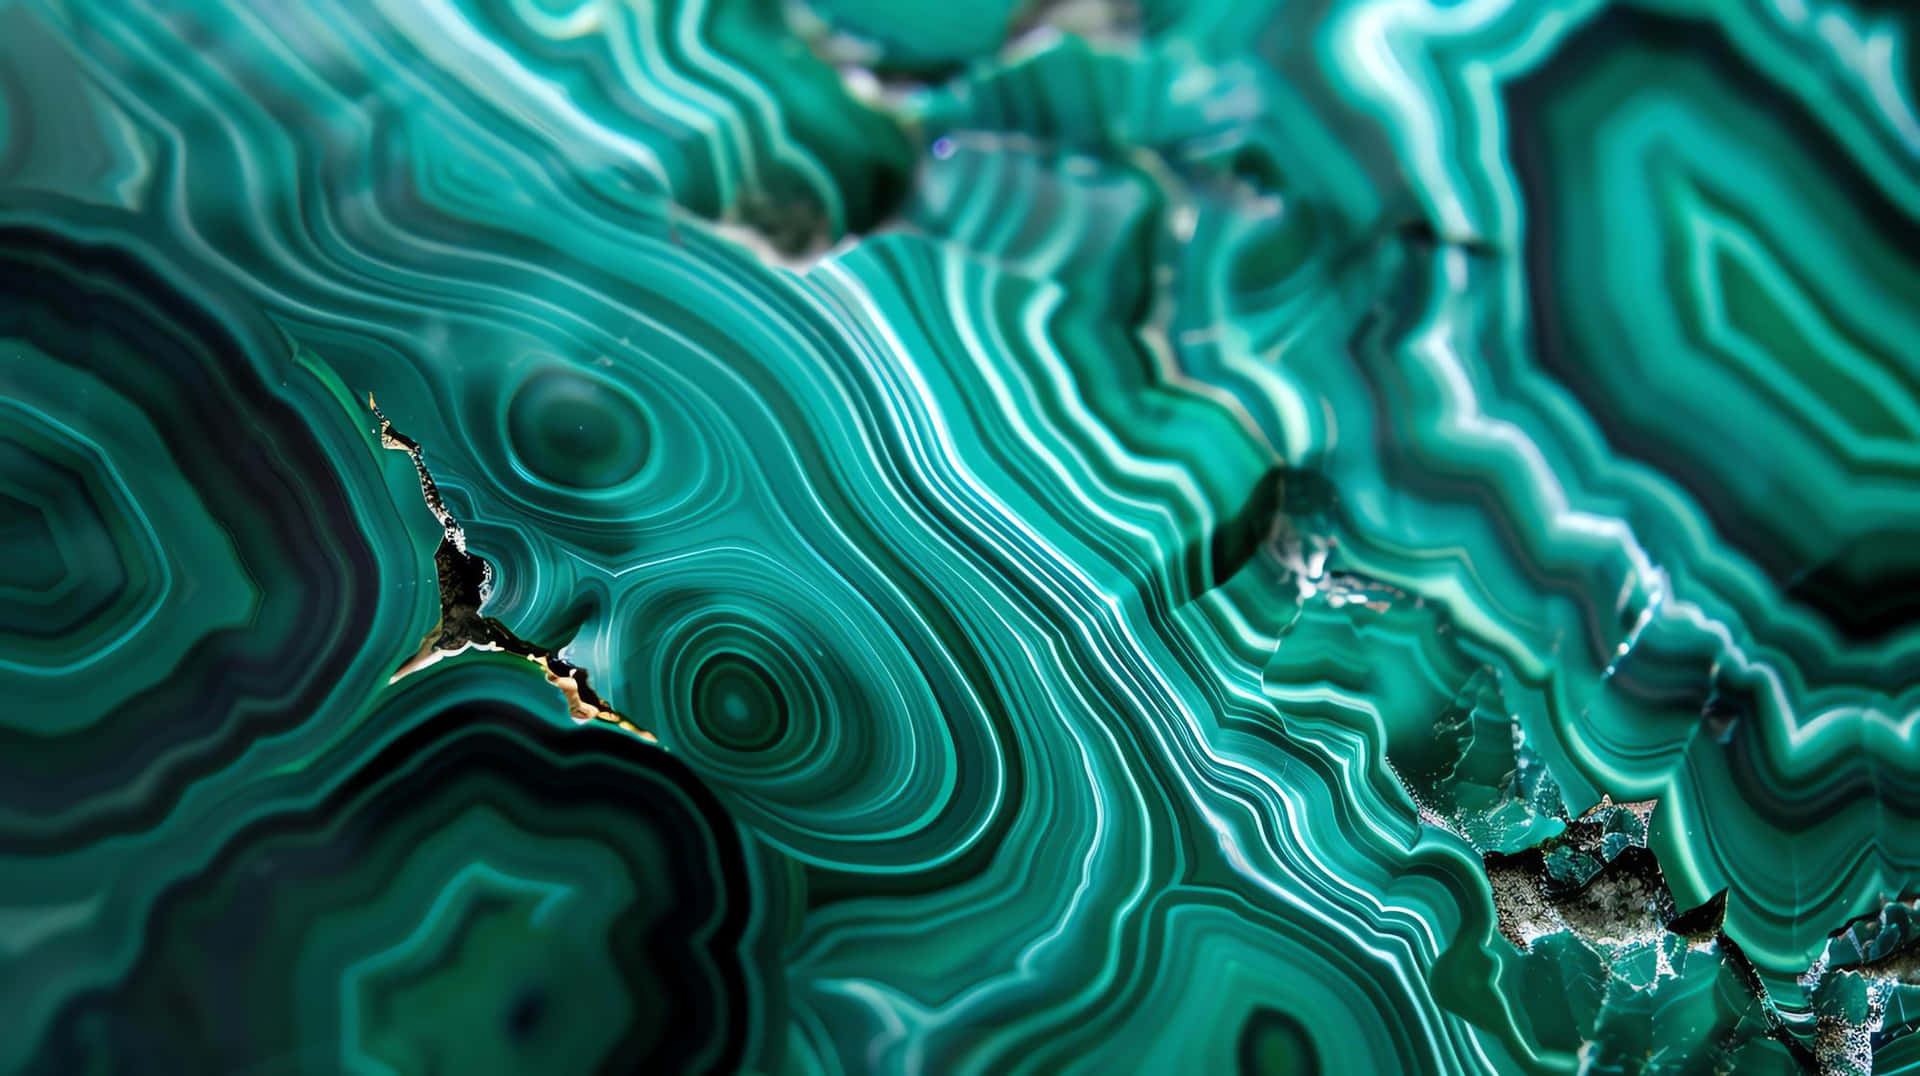 Malachite Green Banded Mineral Texture Background